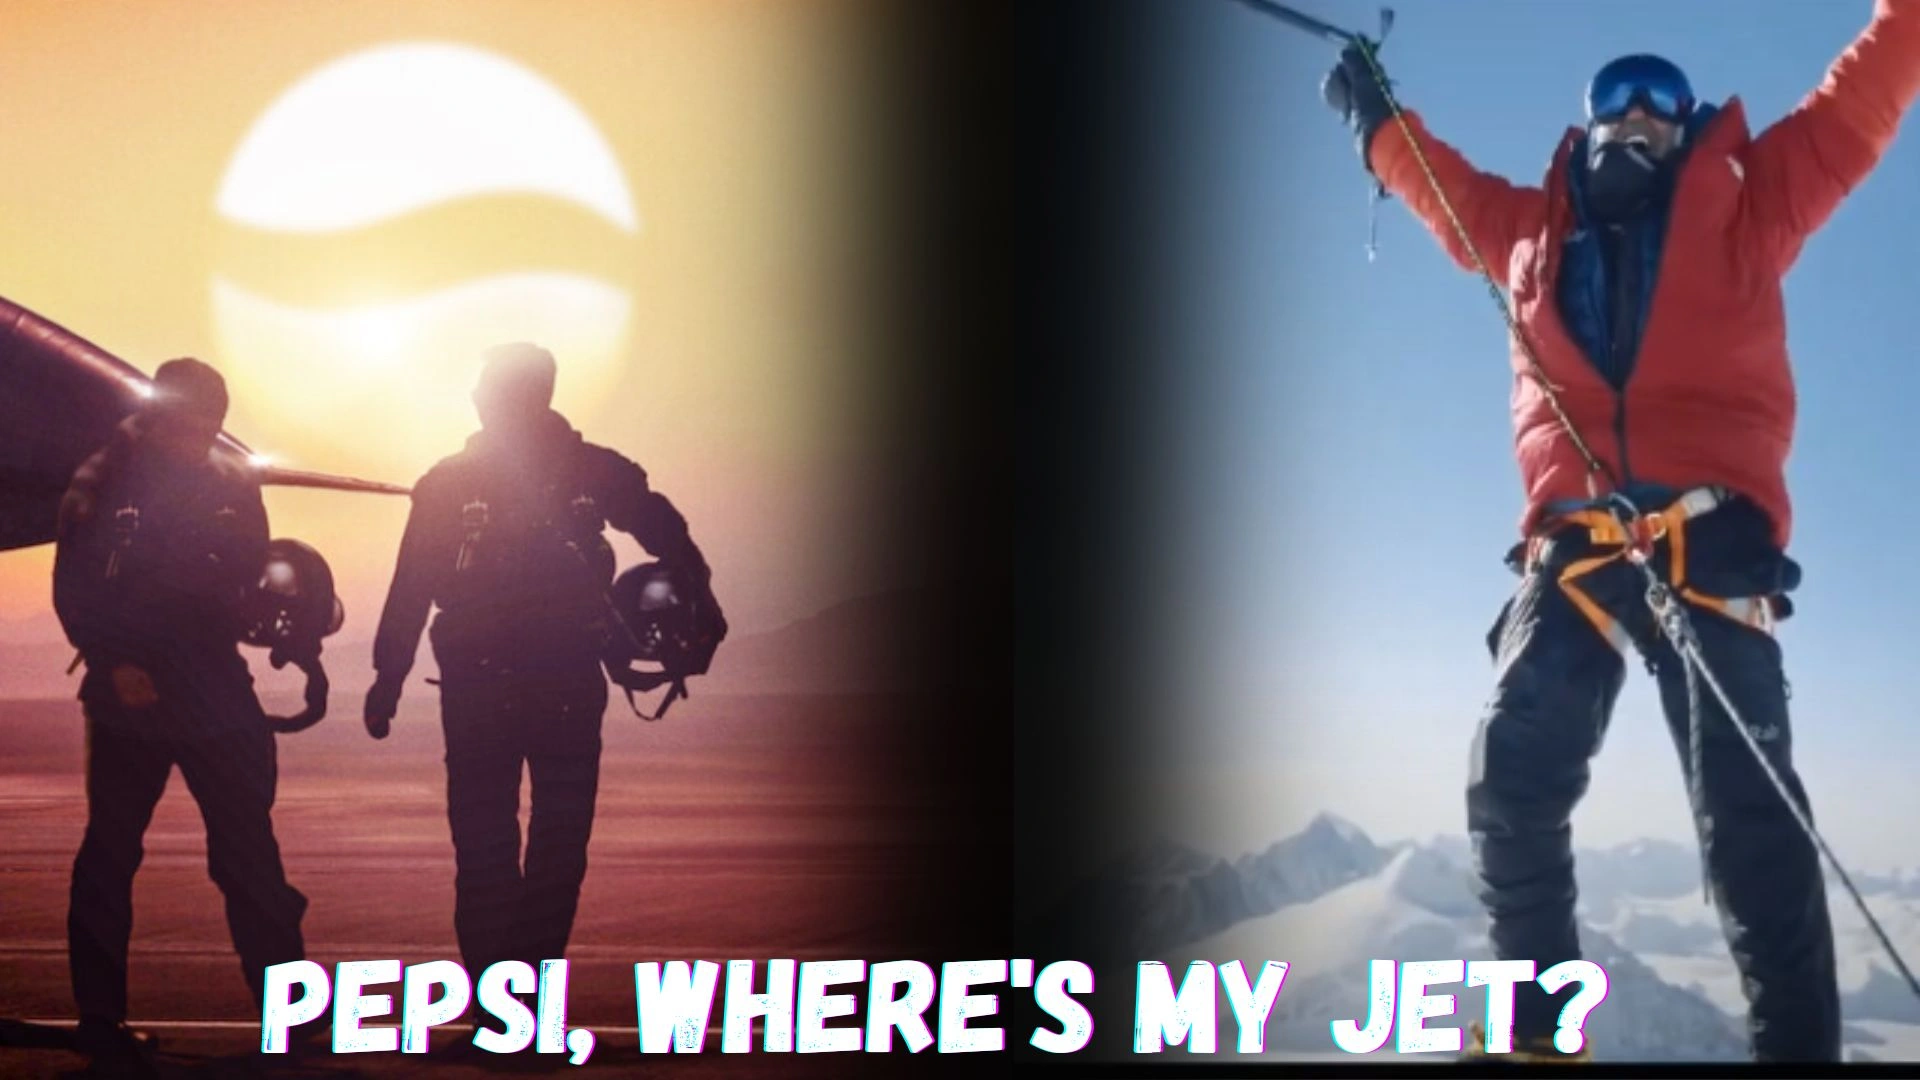 Pepsi, Where's My Jet? Parents Guide and Age Rating (2022)